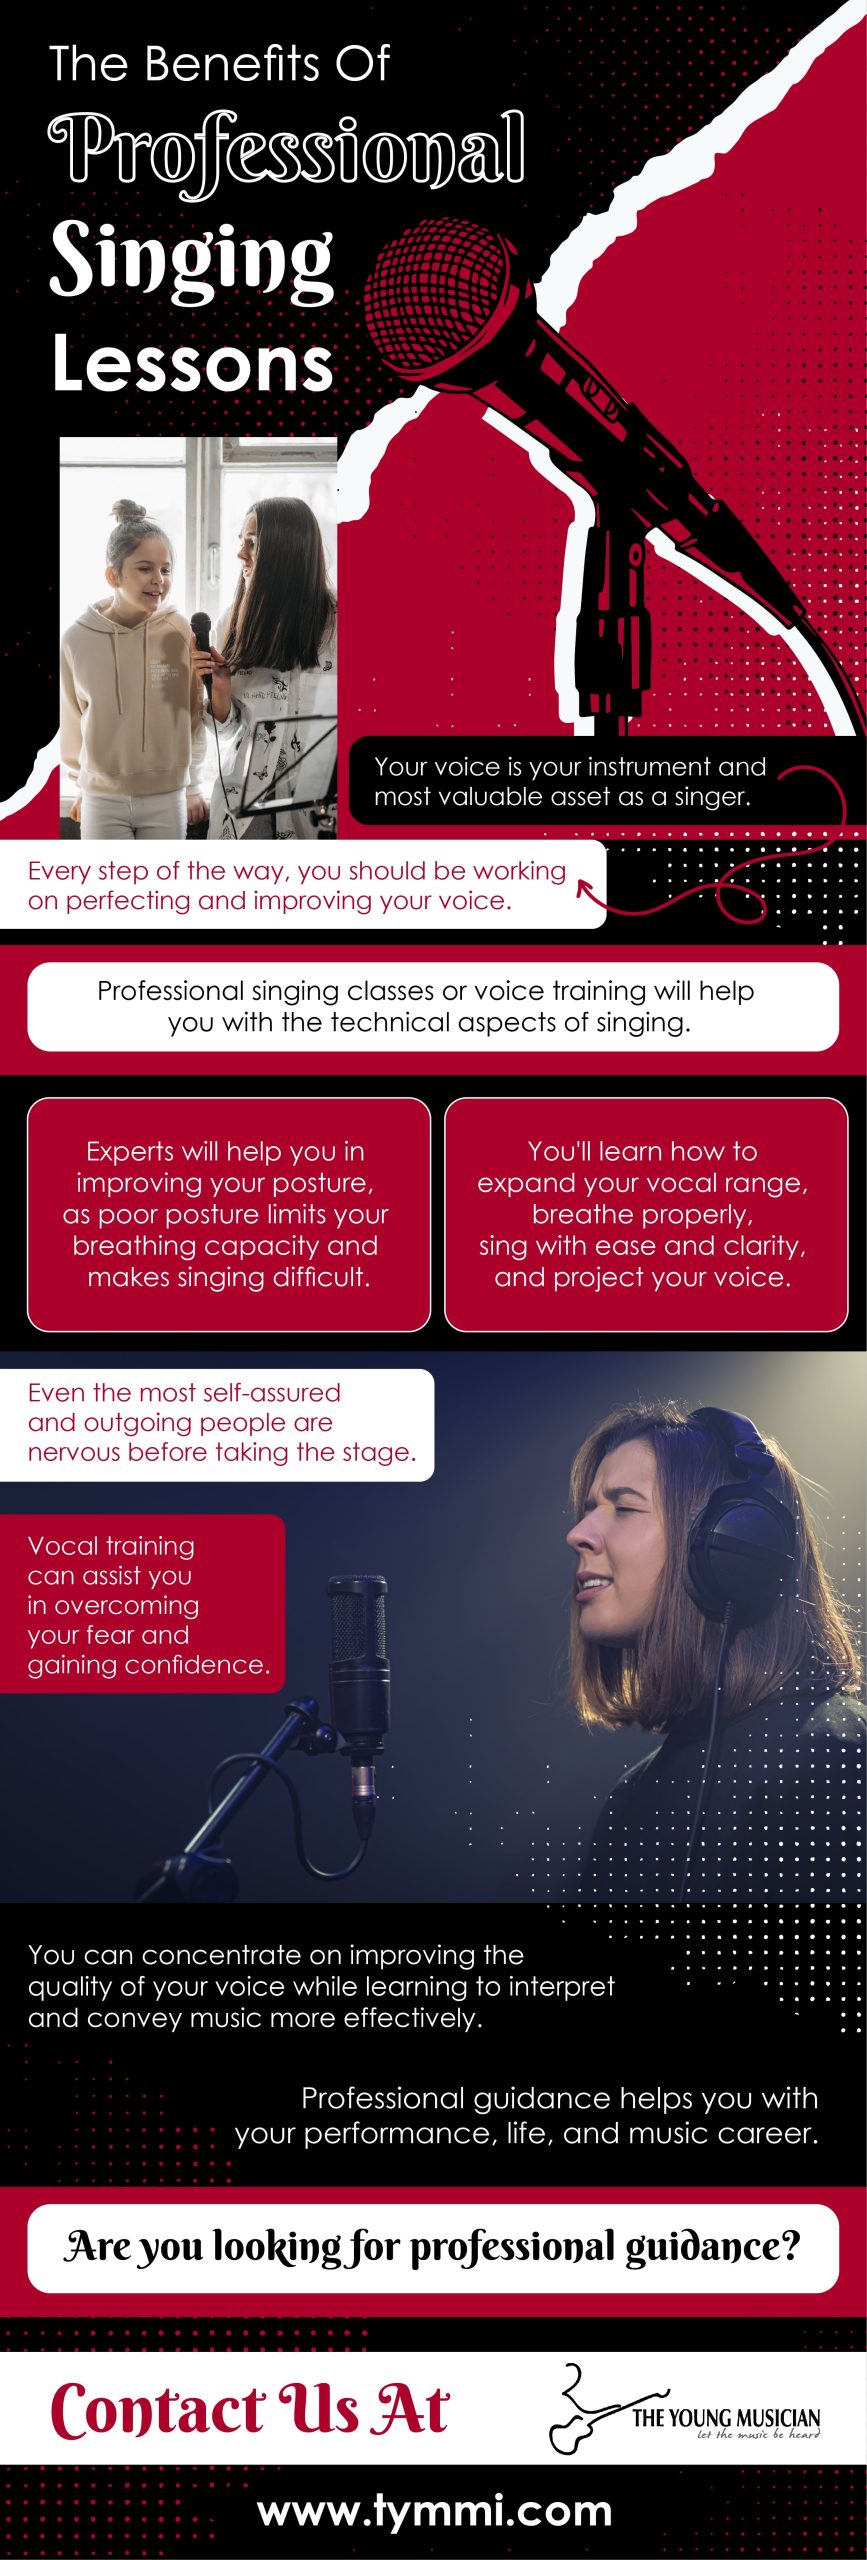 The Benefits of Professional Singing Lessons - Infograph